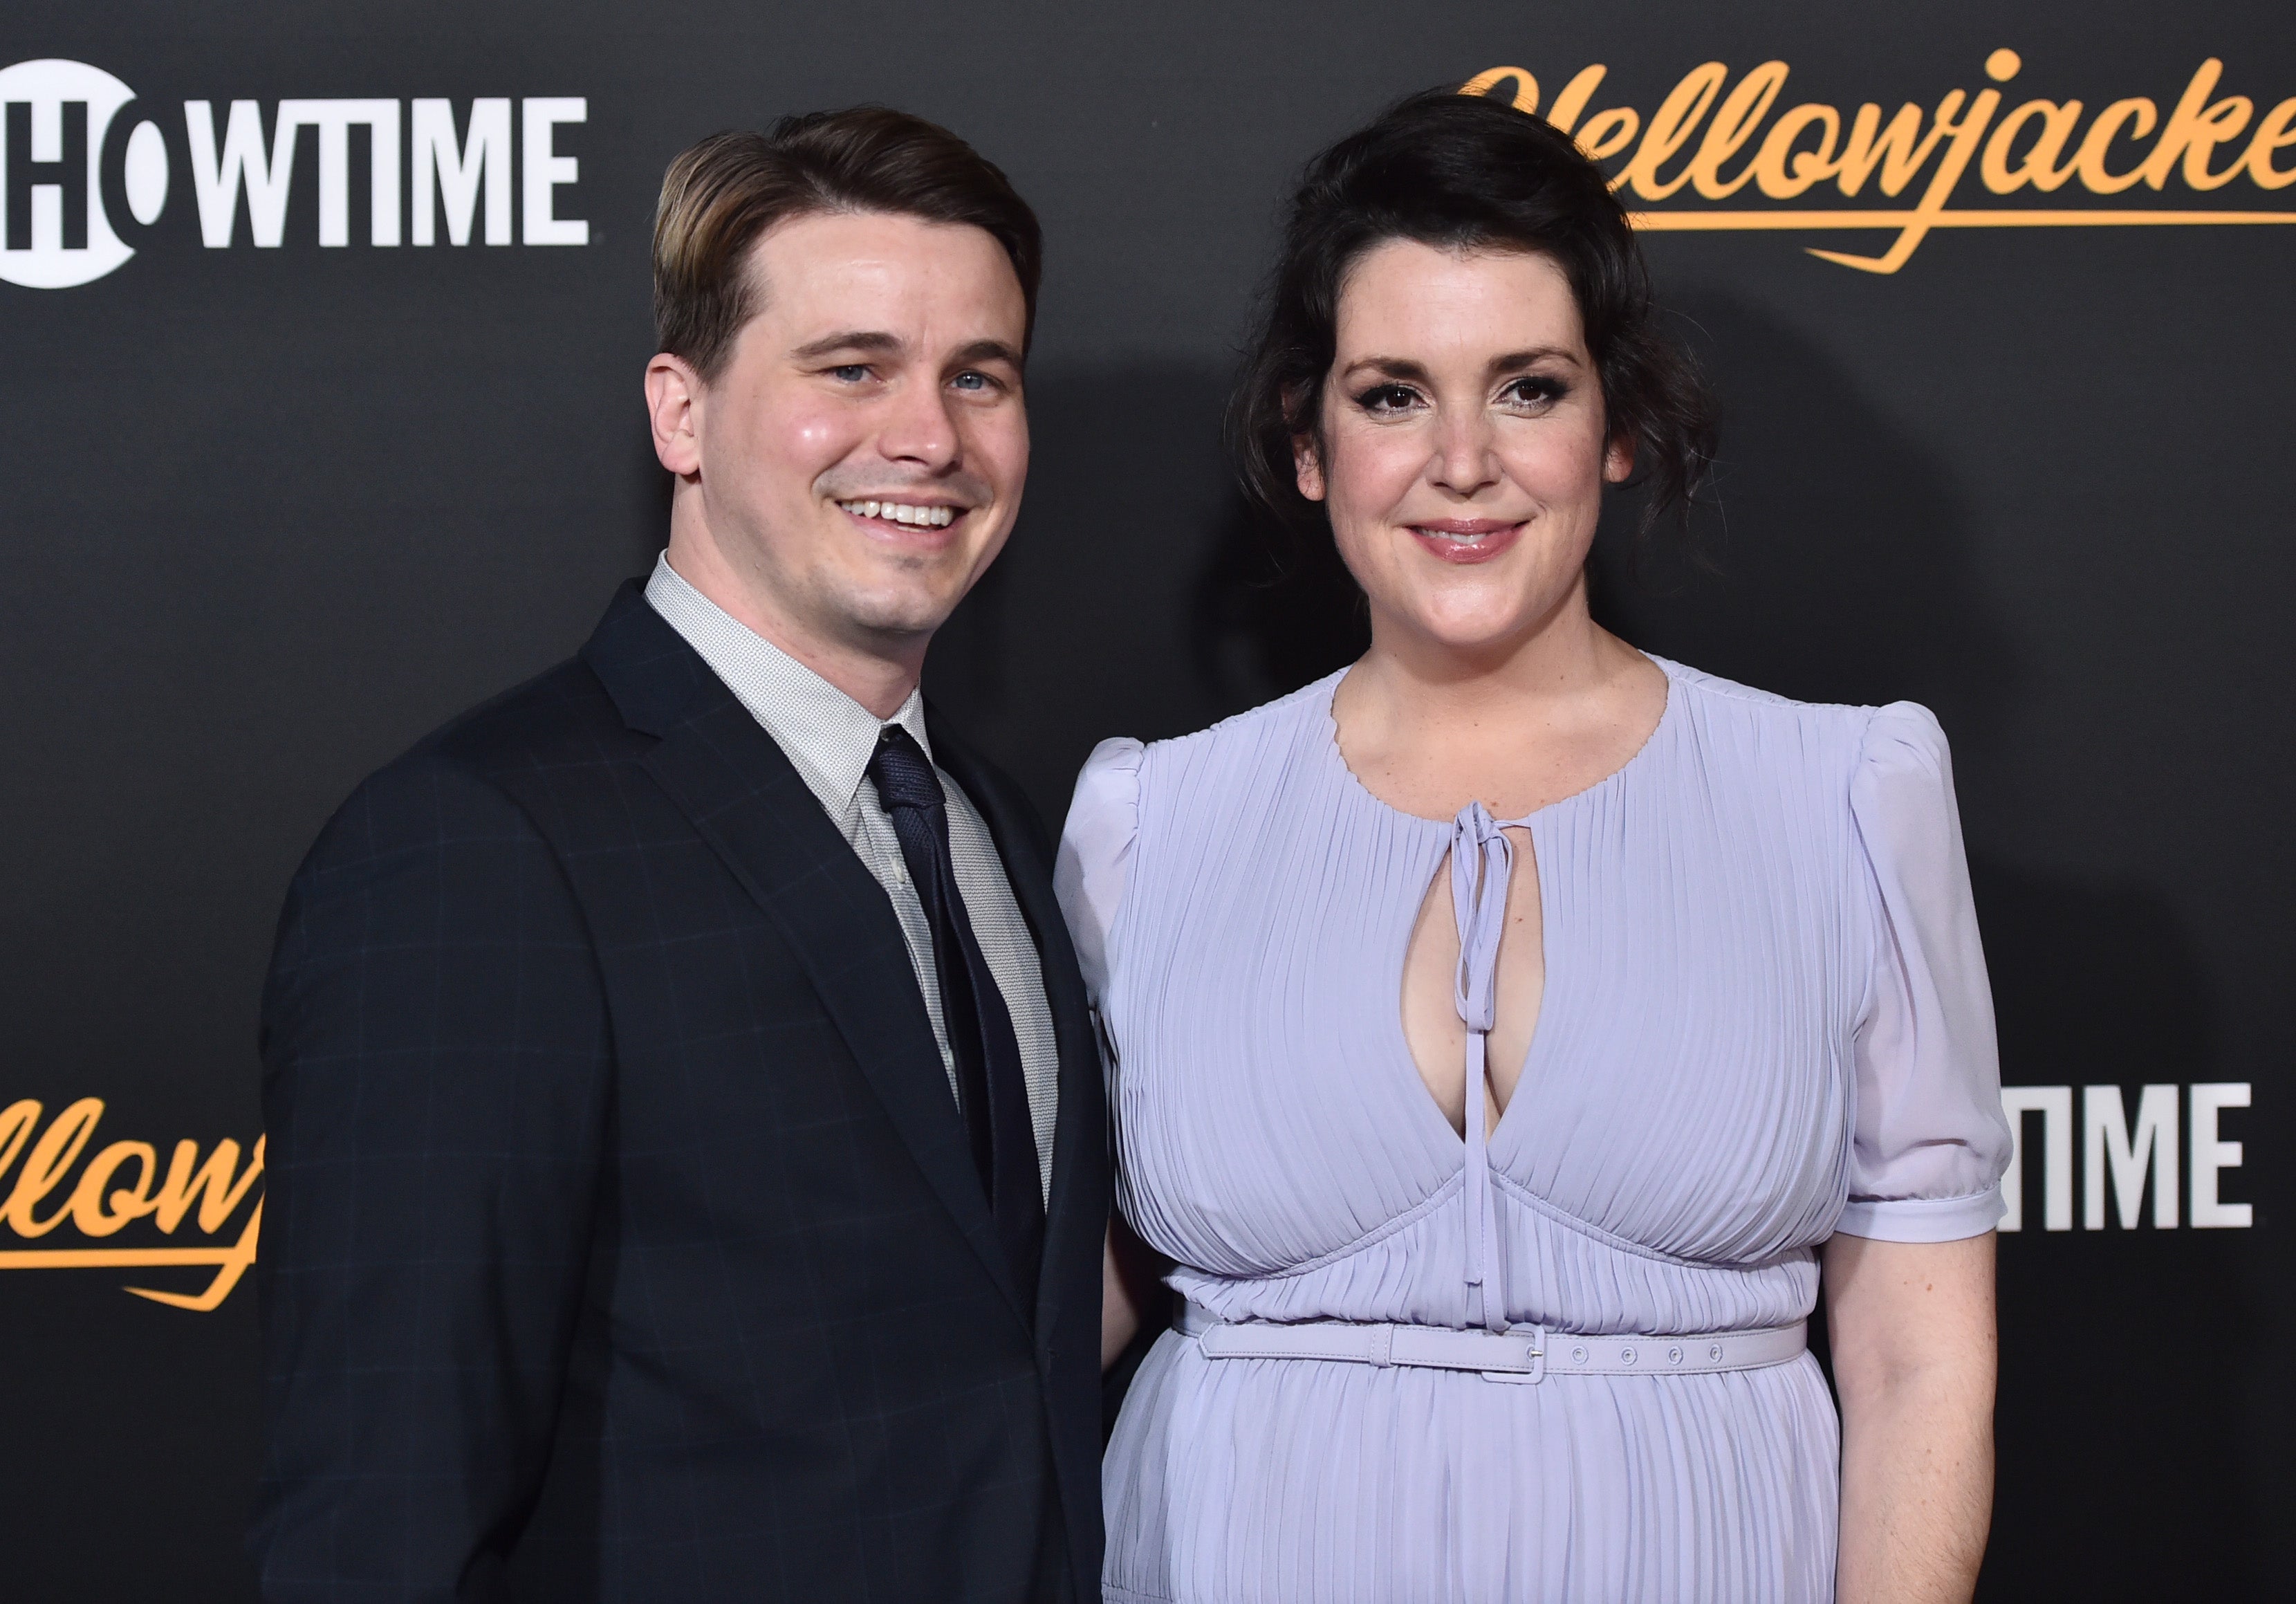 Jason Ritter defends wife Melanie Lynskey after she speaks out against body-shaming comments The Independent